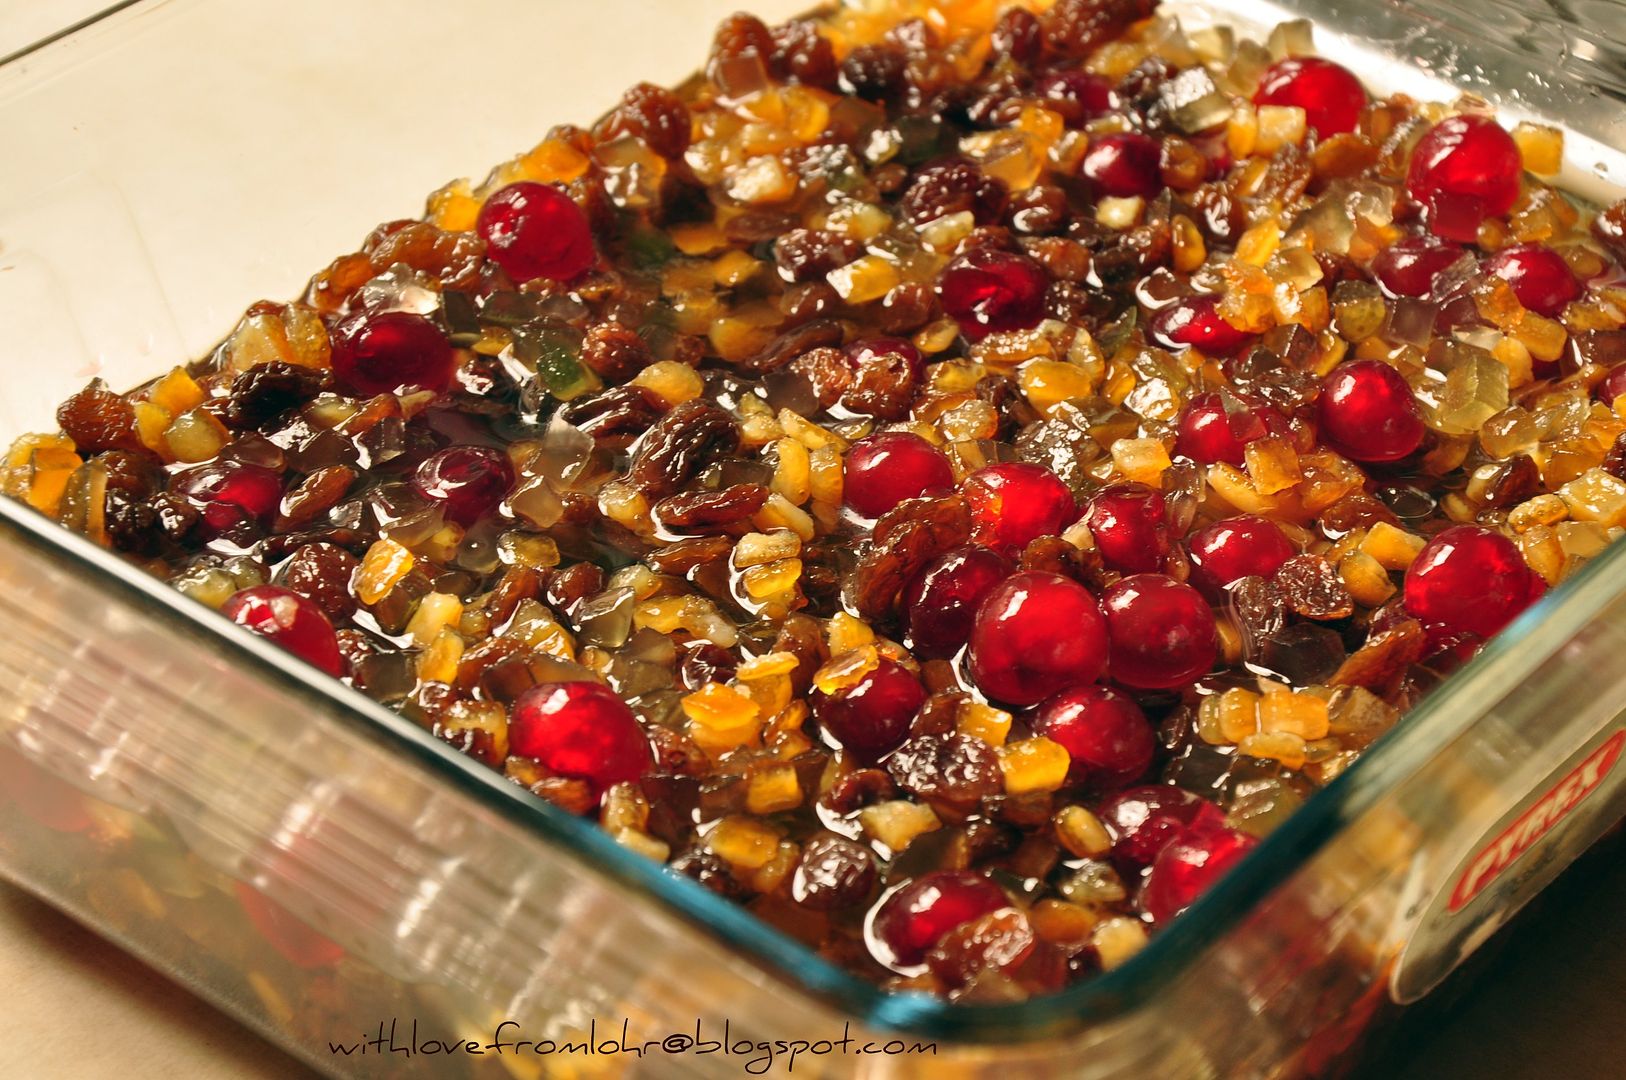 14.10.11, The raisins, cherries, candied peel have all gone a soaking. How do you prepare for Christmas?